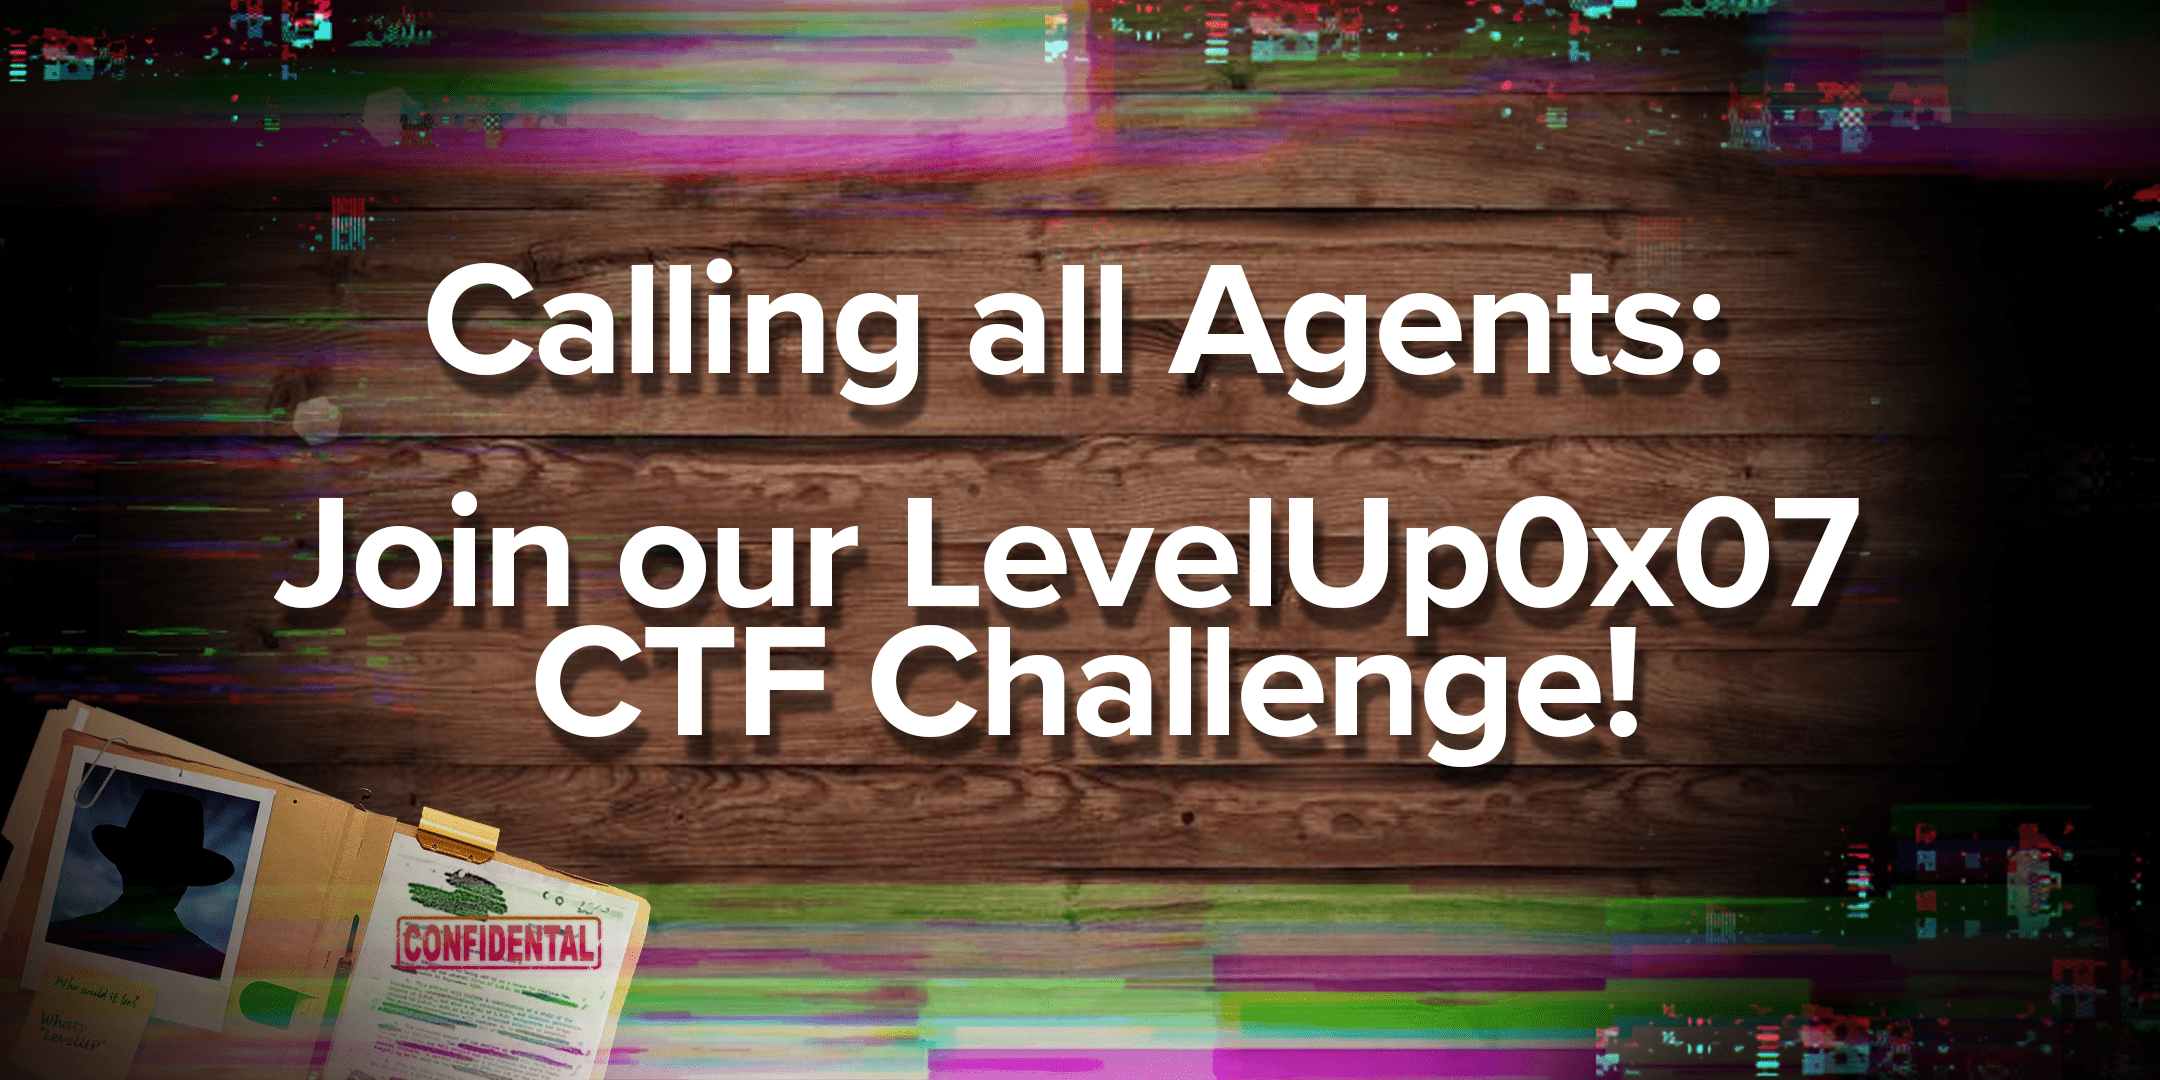 Calling all Agents: Join our LevelUp0x07 CTF Challenge!